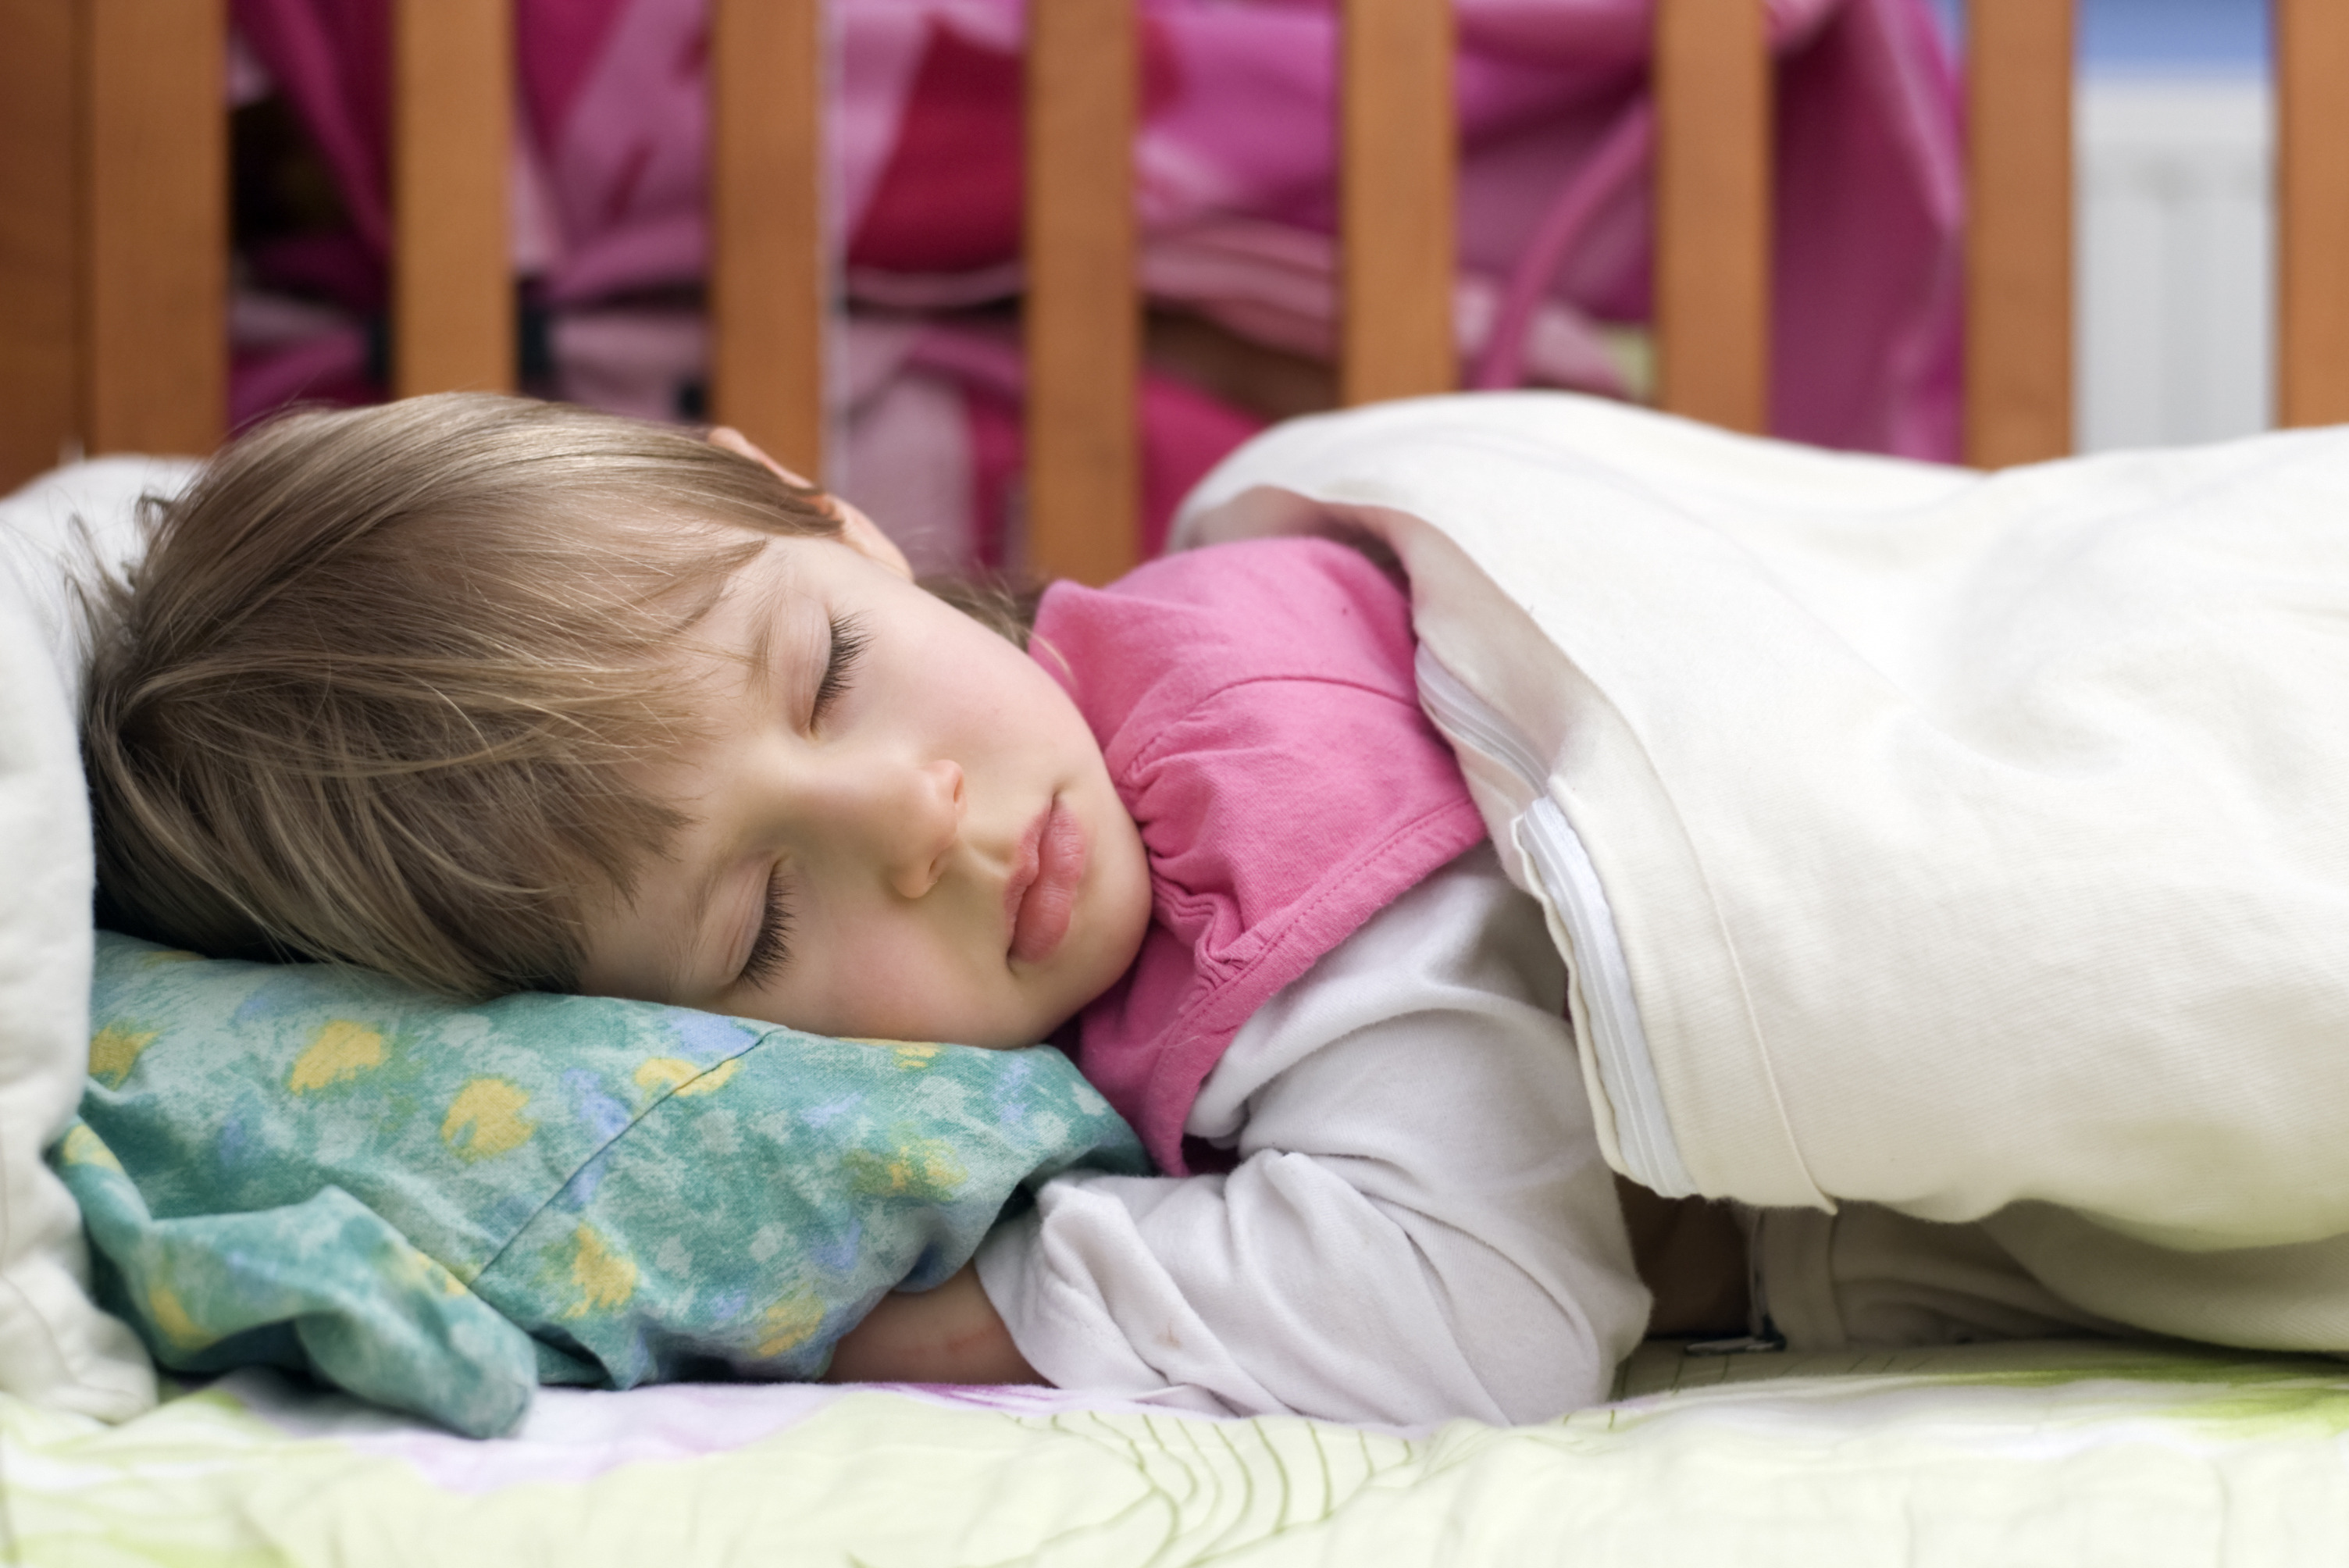 £10 could help a family buy a duvet for their child, so they can have a good night’s sleep.